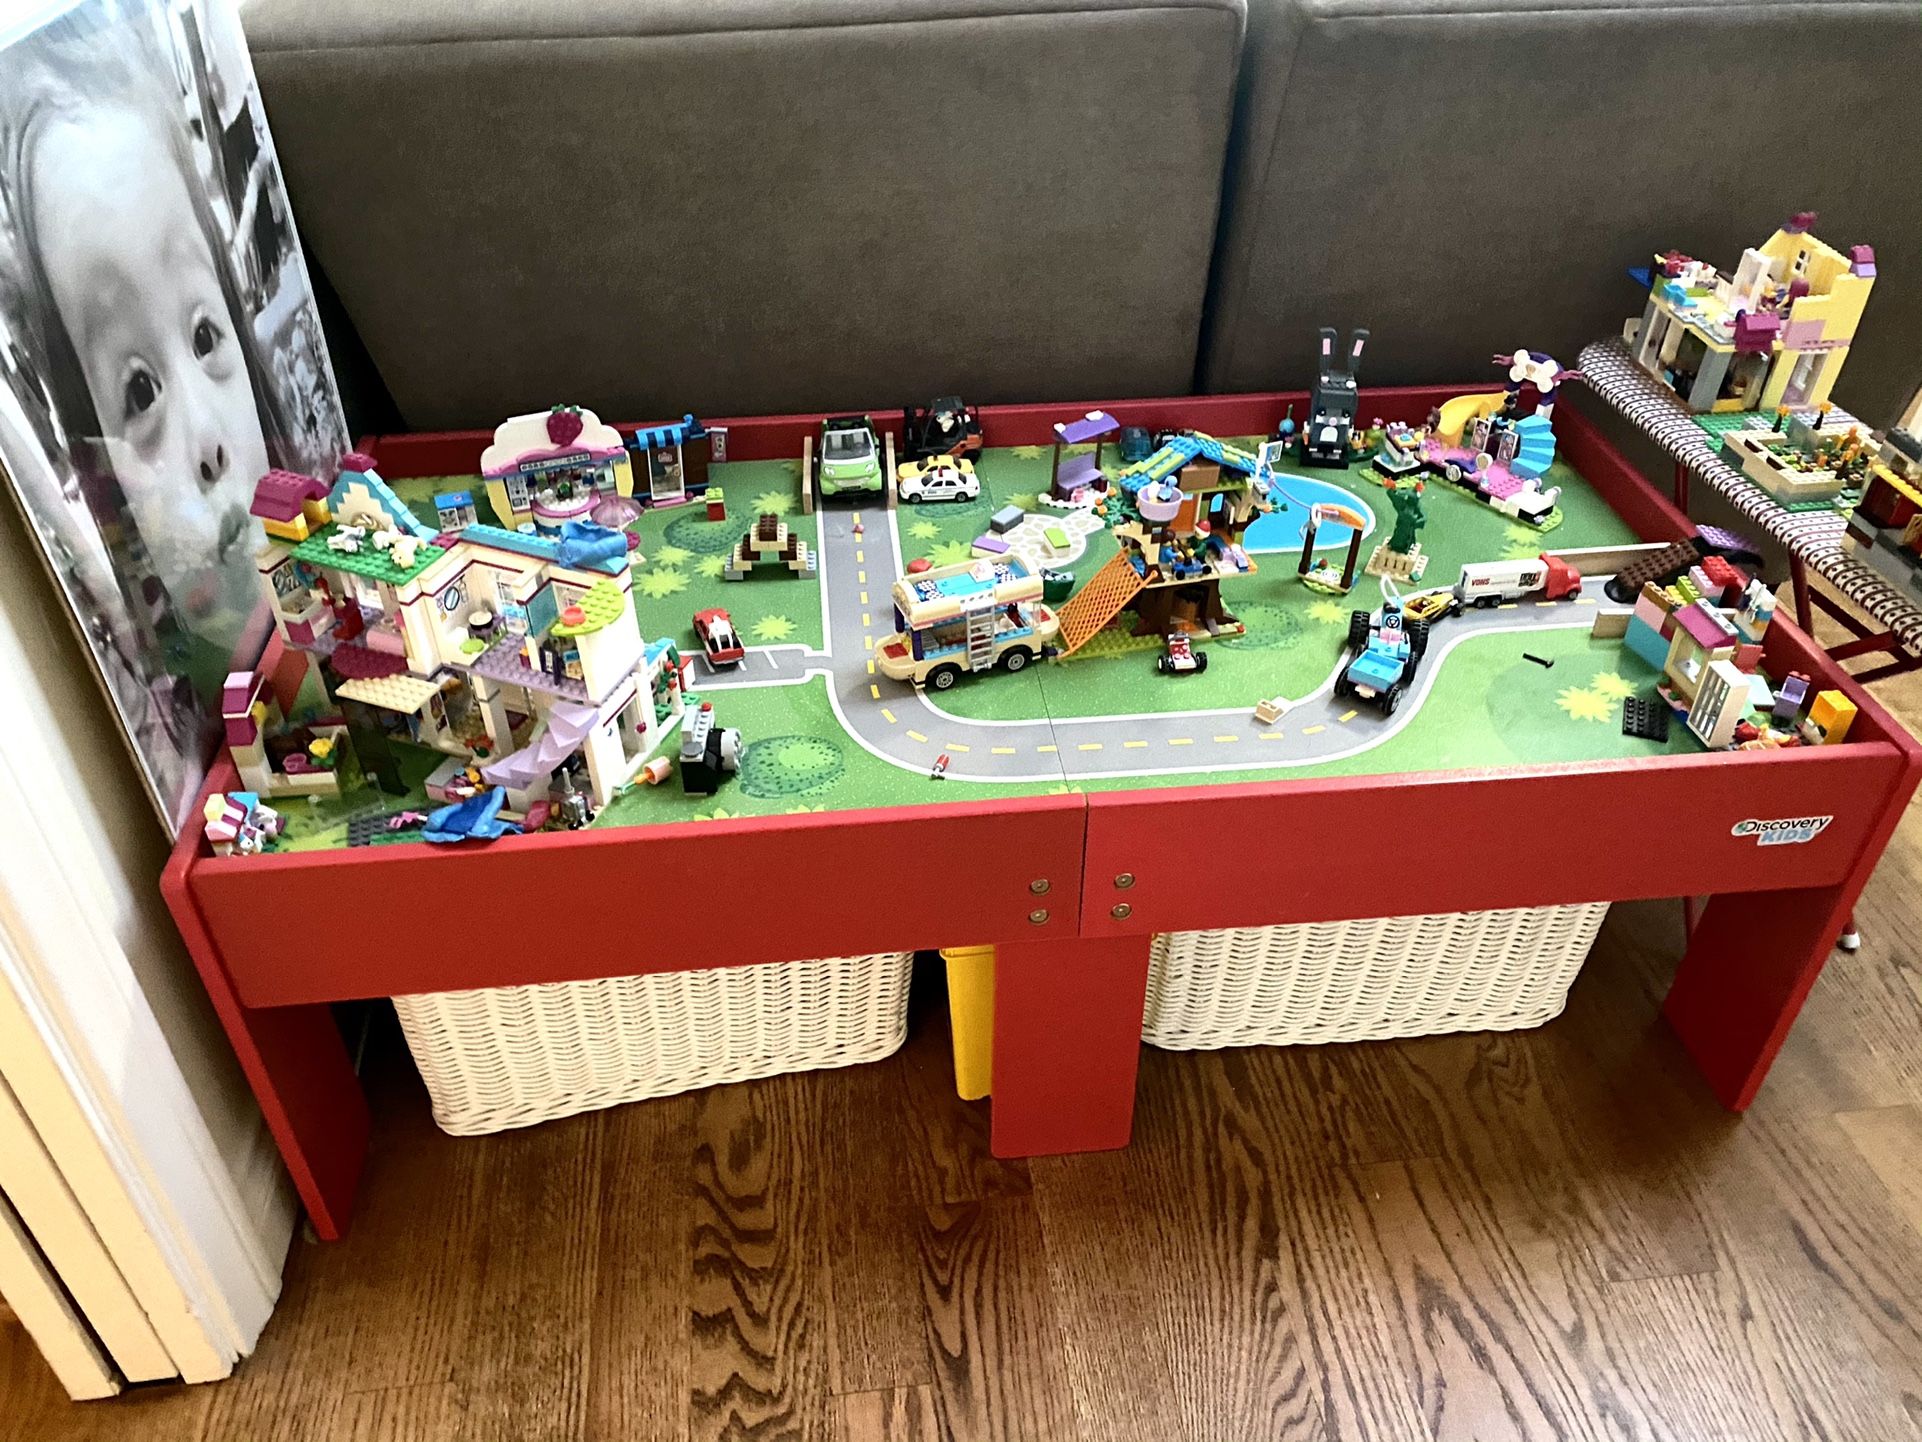 Train Lego Table Discovery kids